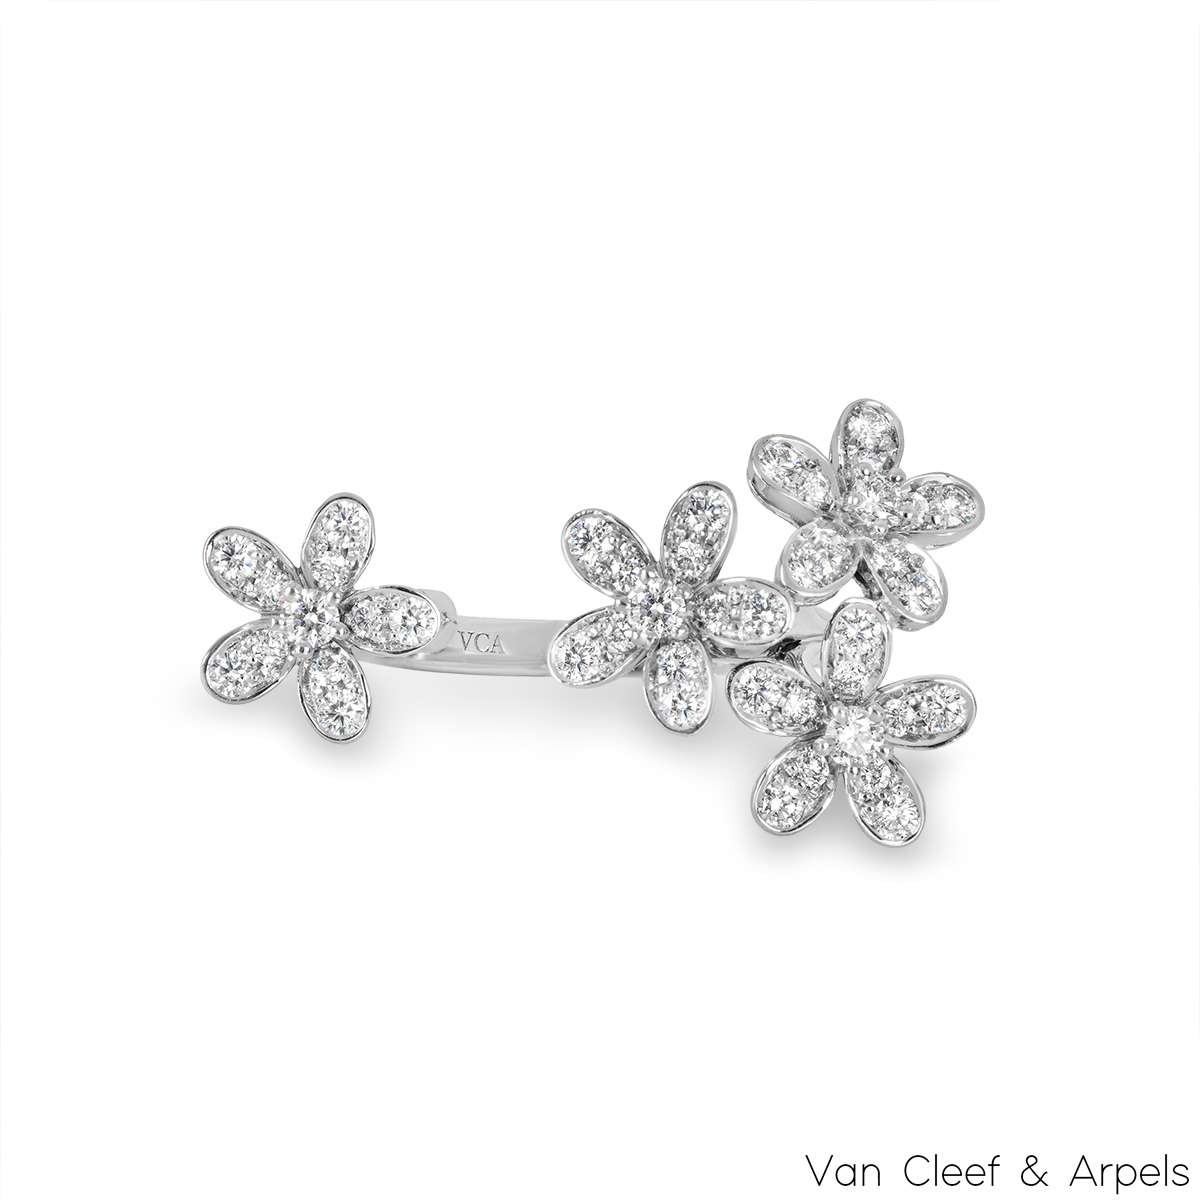 Van Cleef & Arpels White Gold Diamond Socrate Ring VCARB14500 | Rich ...